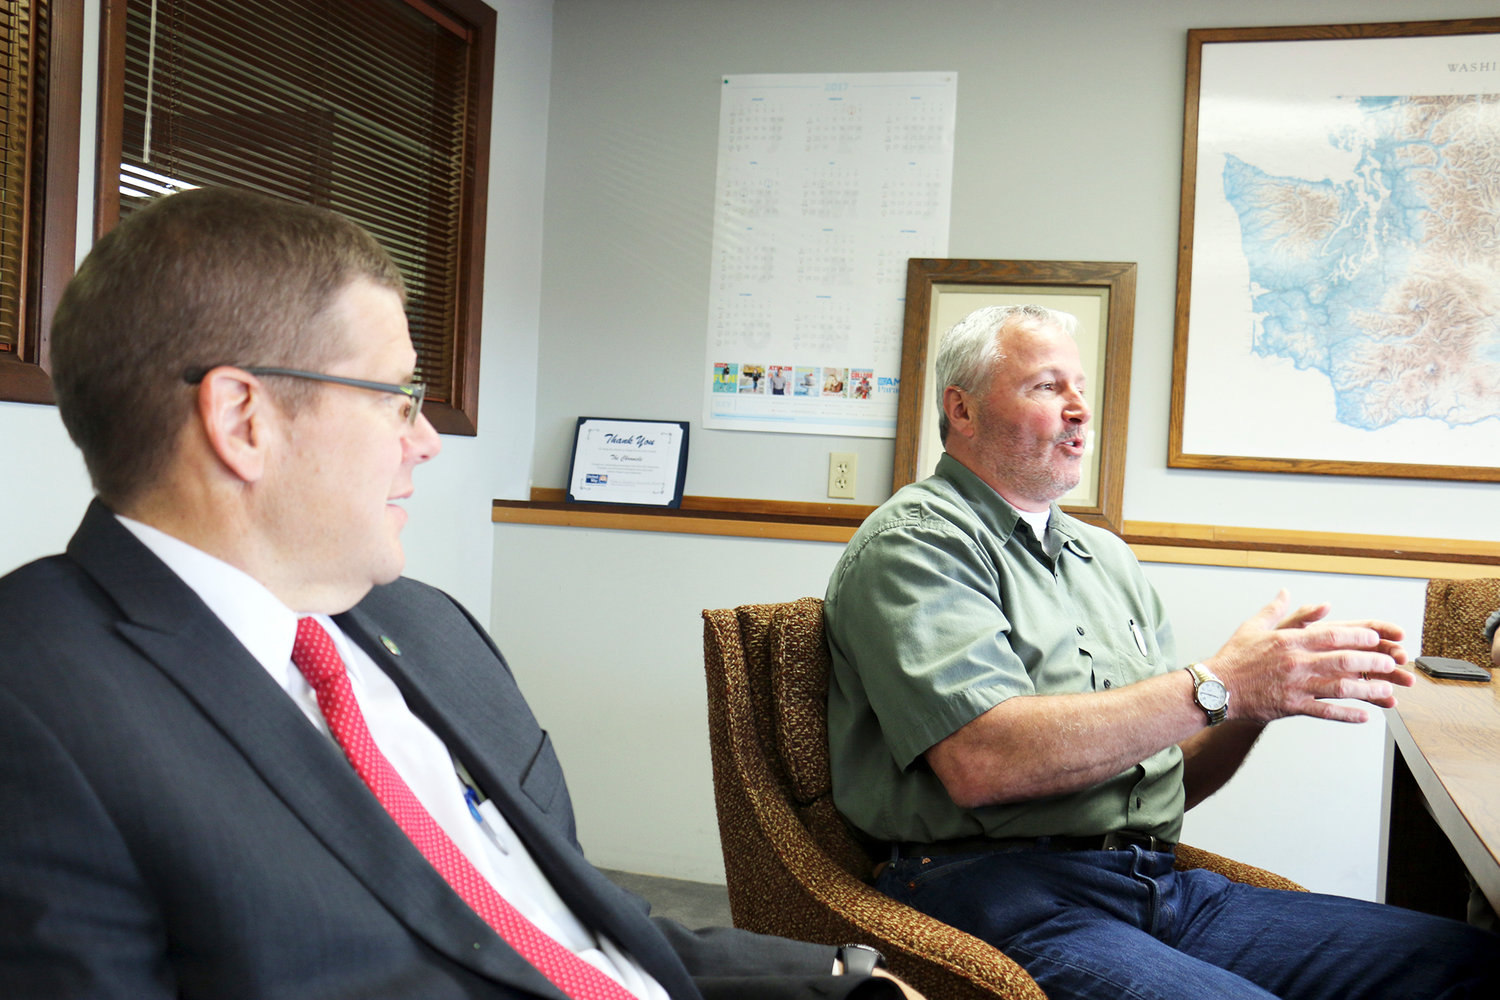 2017 FILE PHOTO — Dan Rich, president of the Centralia Community Foundation, discusses the partnership it has created with the Centralia School District in order to receive a $2 million grant from TransAlta, while Jonathan Meyer, secretary of the foundation and Lewis County prosecutor, looks on.